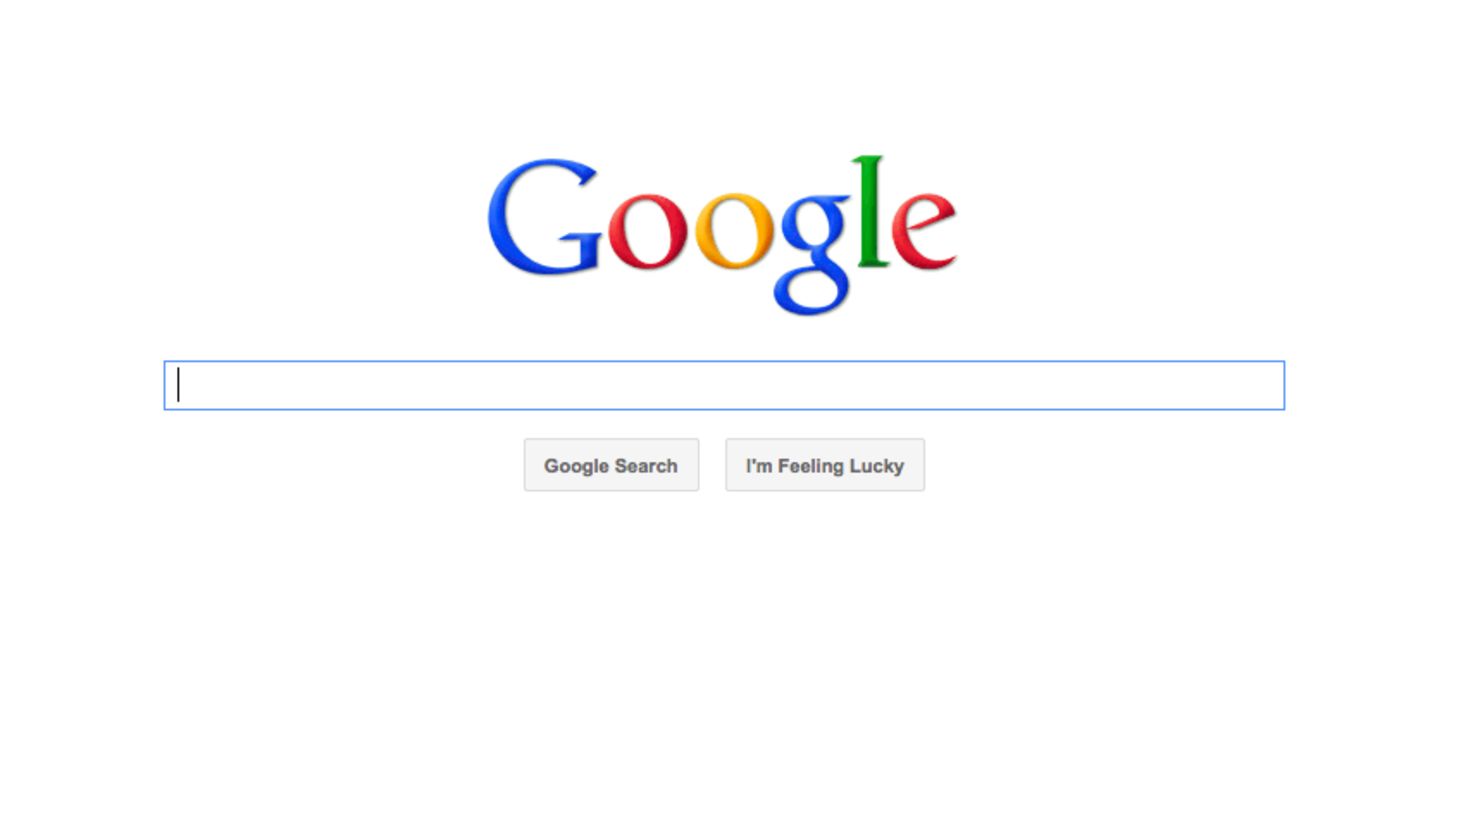 If Google's search results depend on the +1 button, there will be increased pressure on websites to add that capability.